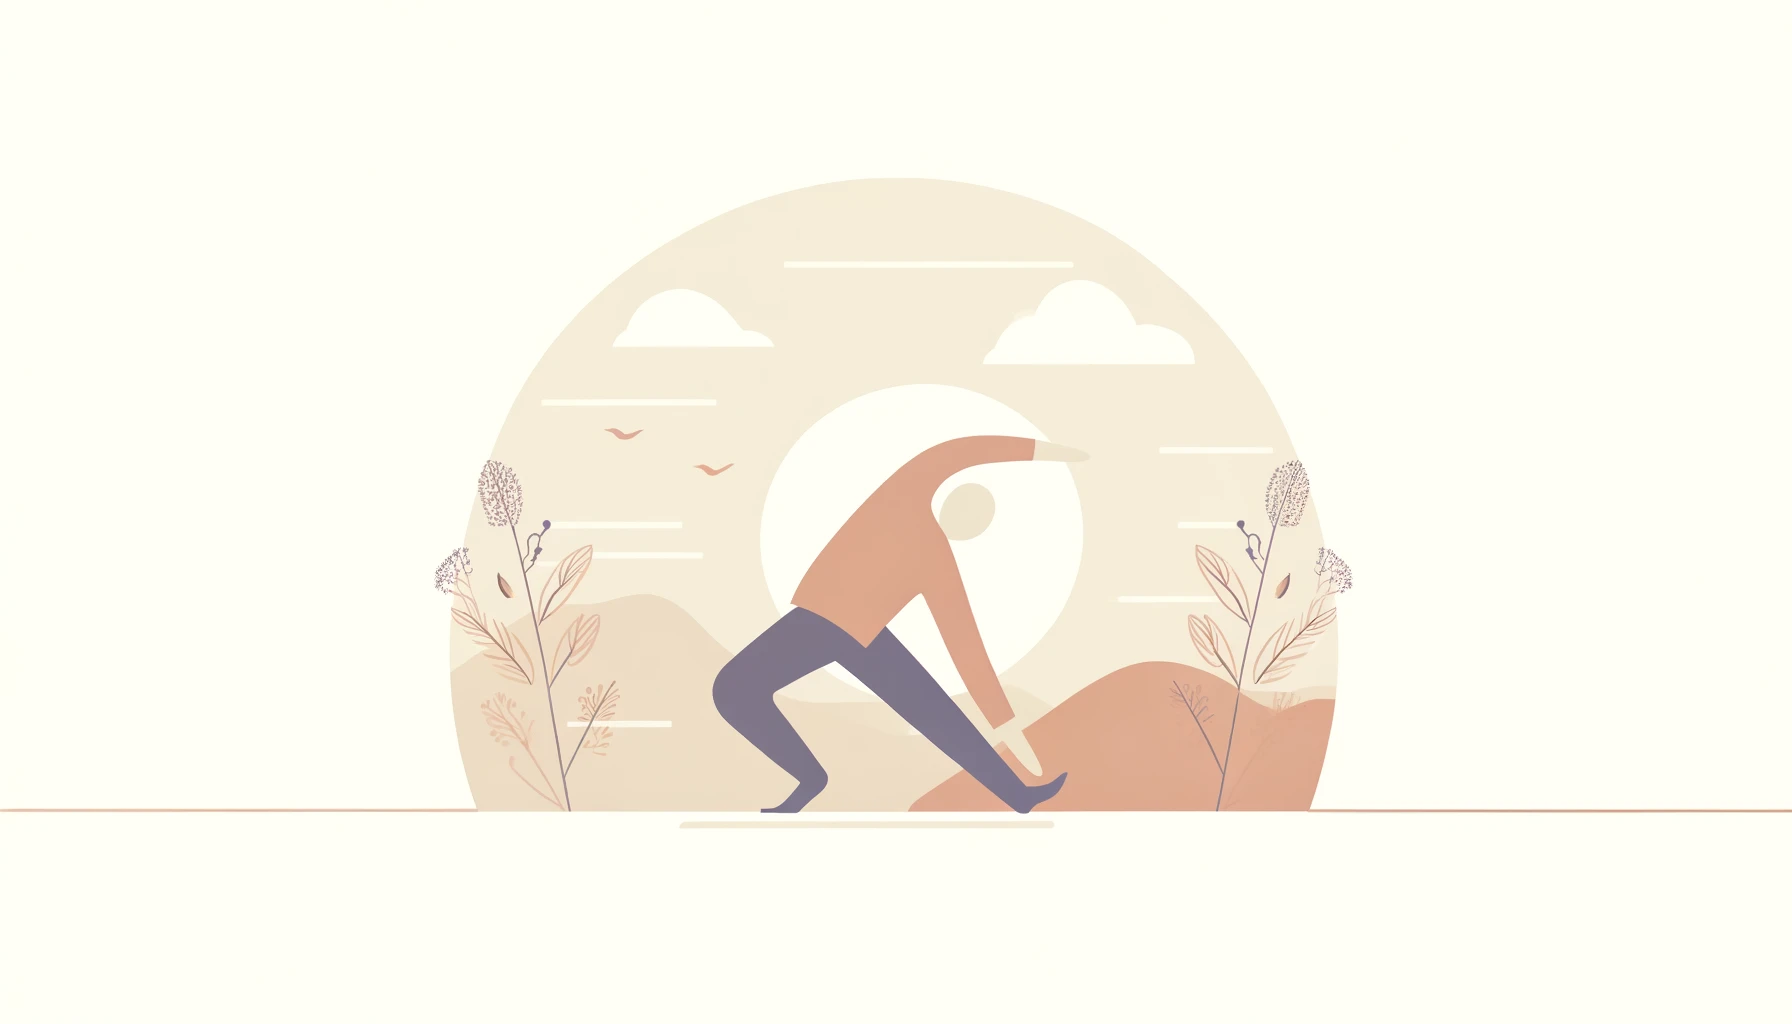 A simple, wide illustration for a blog header, depicting the concept of 'The Importance of Stretching'. The image should feature a person of ambiguous gender, performing a stretching exercise, such as touching their toes or stretching their arms. The setting should be minimalistic with soft, calming colors to reflect the relaxing nature of stretching. This illustration should clearly represent the theme of stretching in a clear and visually appealing manner.